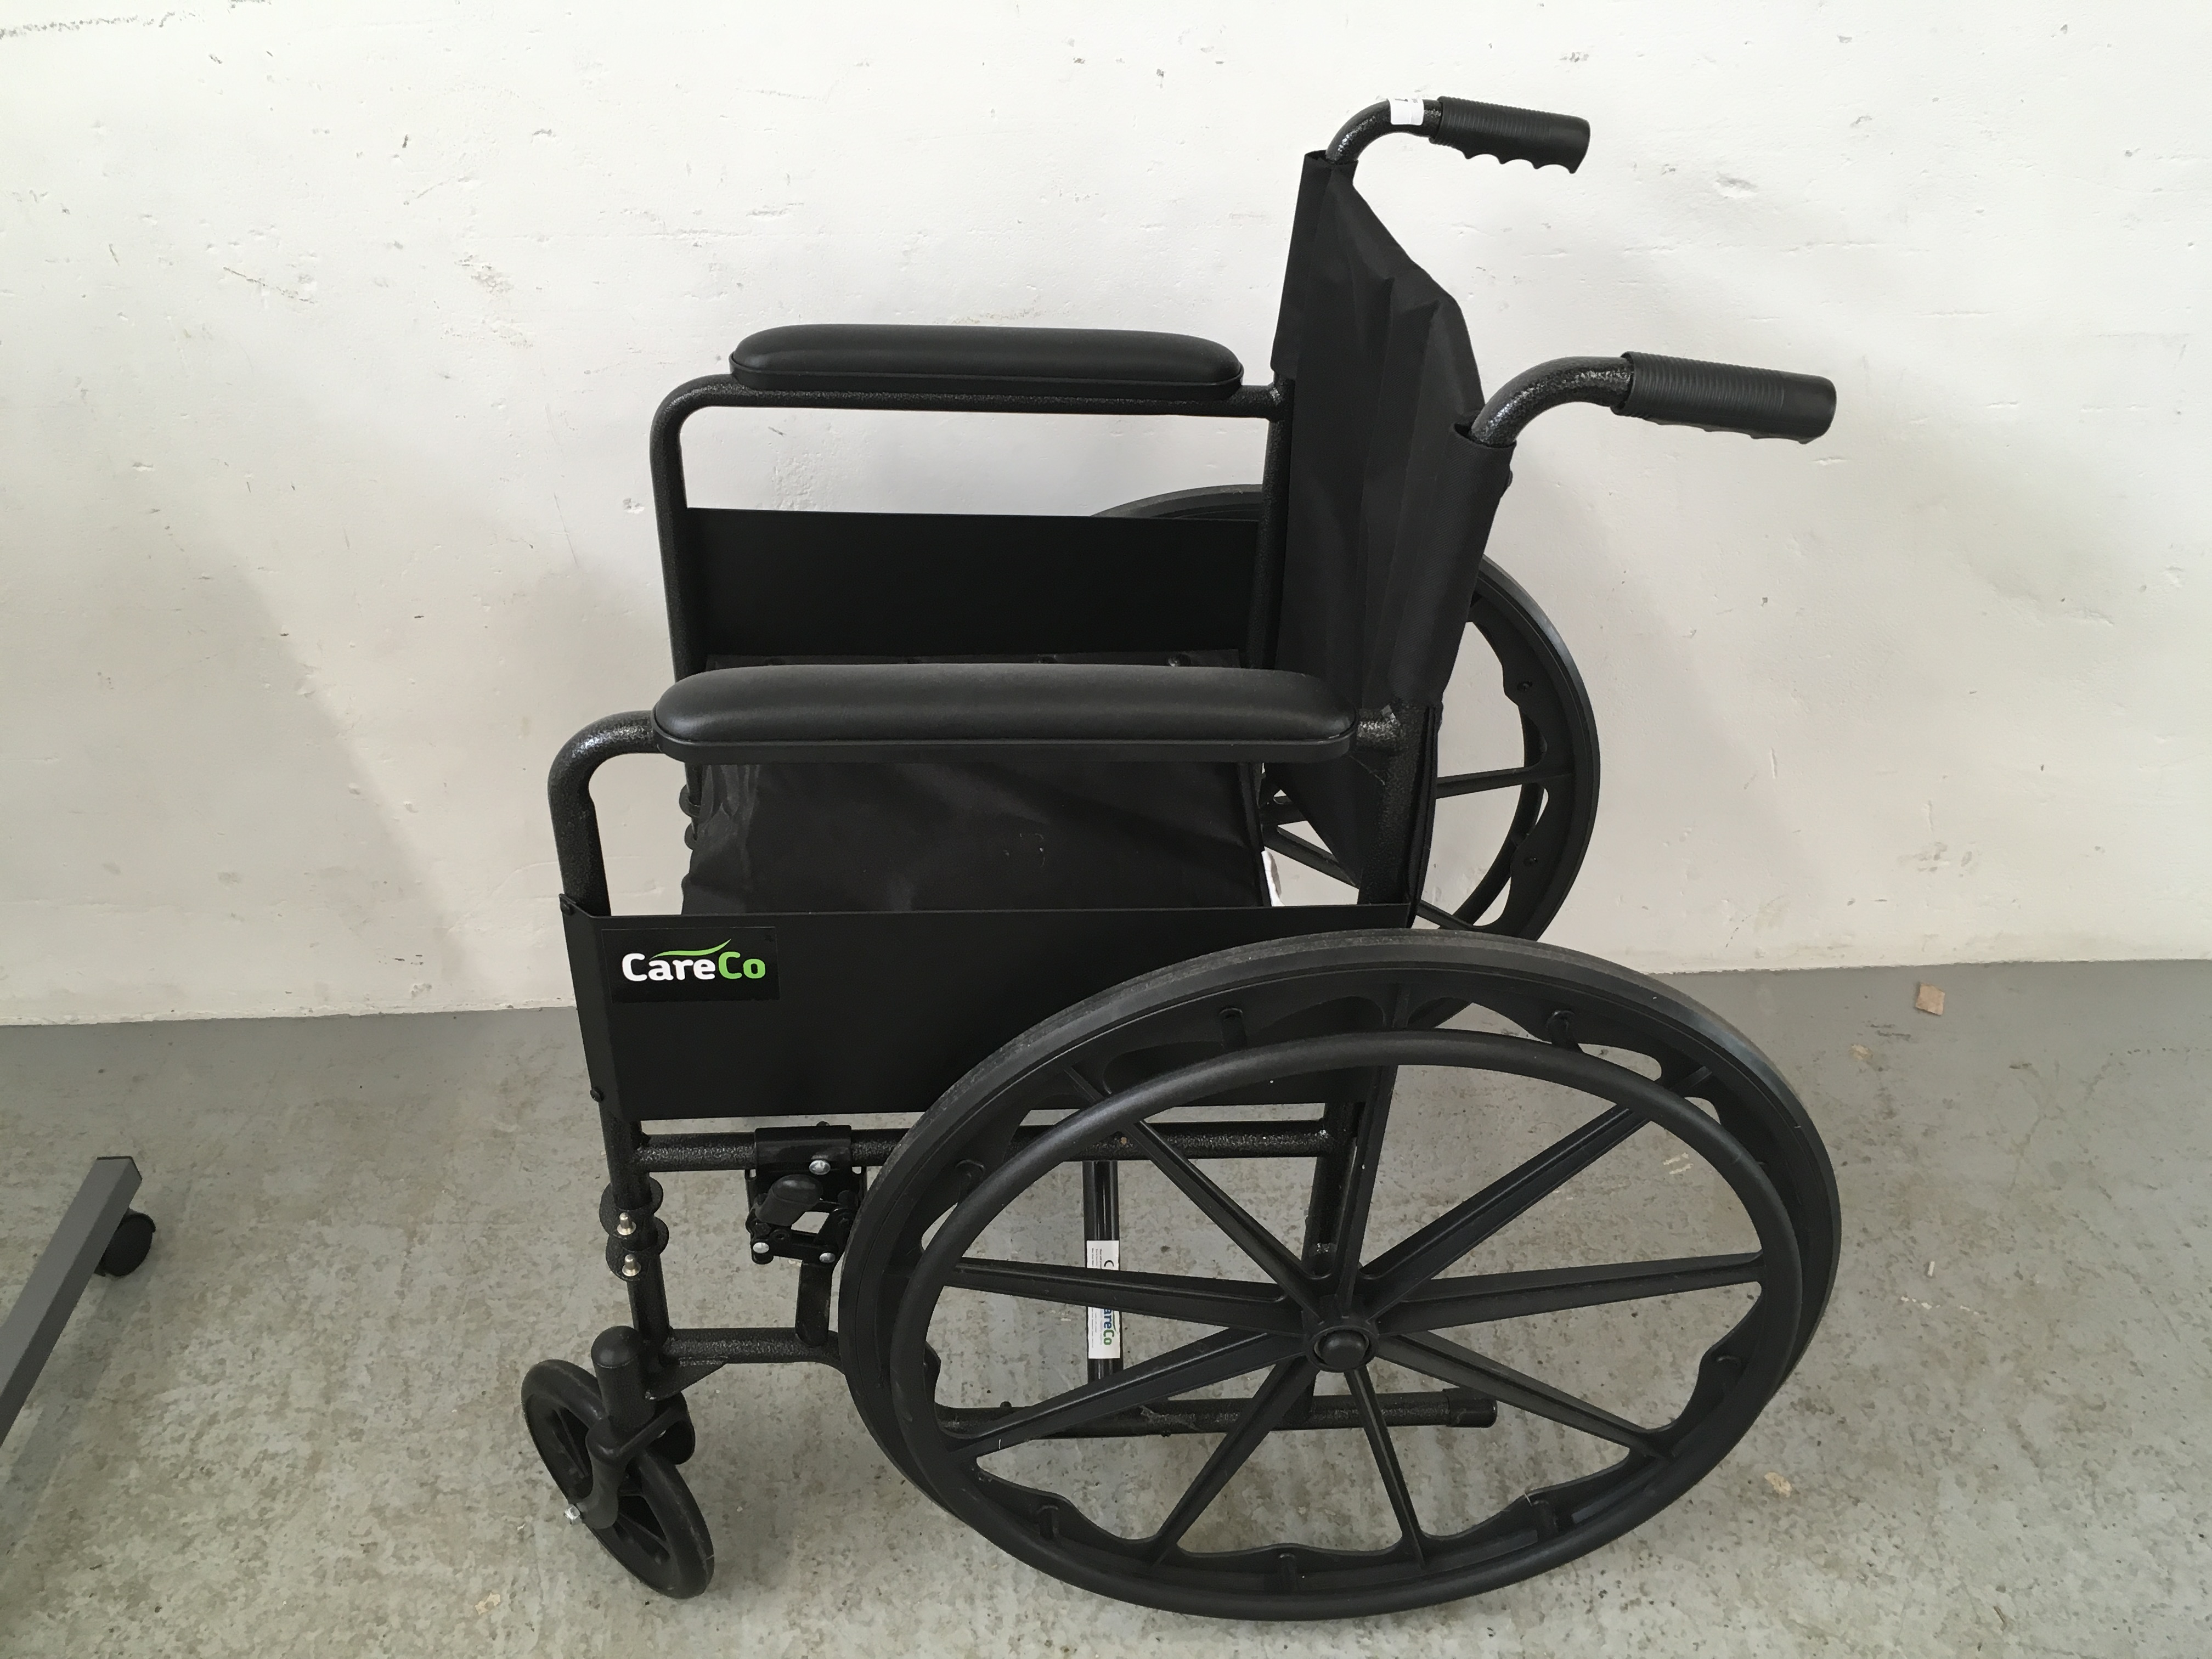 CARE CO WHEEL CHAIR AND FOOT RESTS ALONG WITH A WHEELED BED TRAY - Image 6 of 9